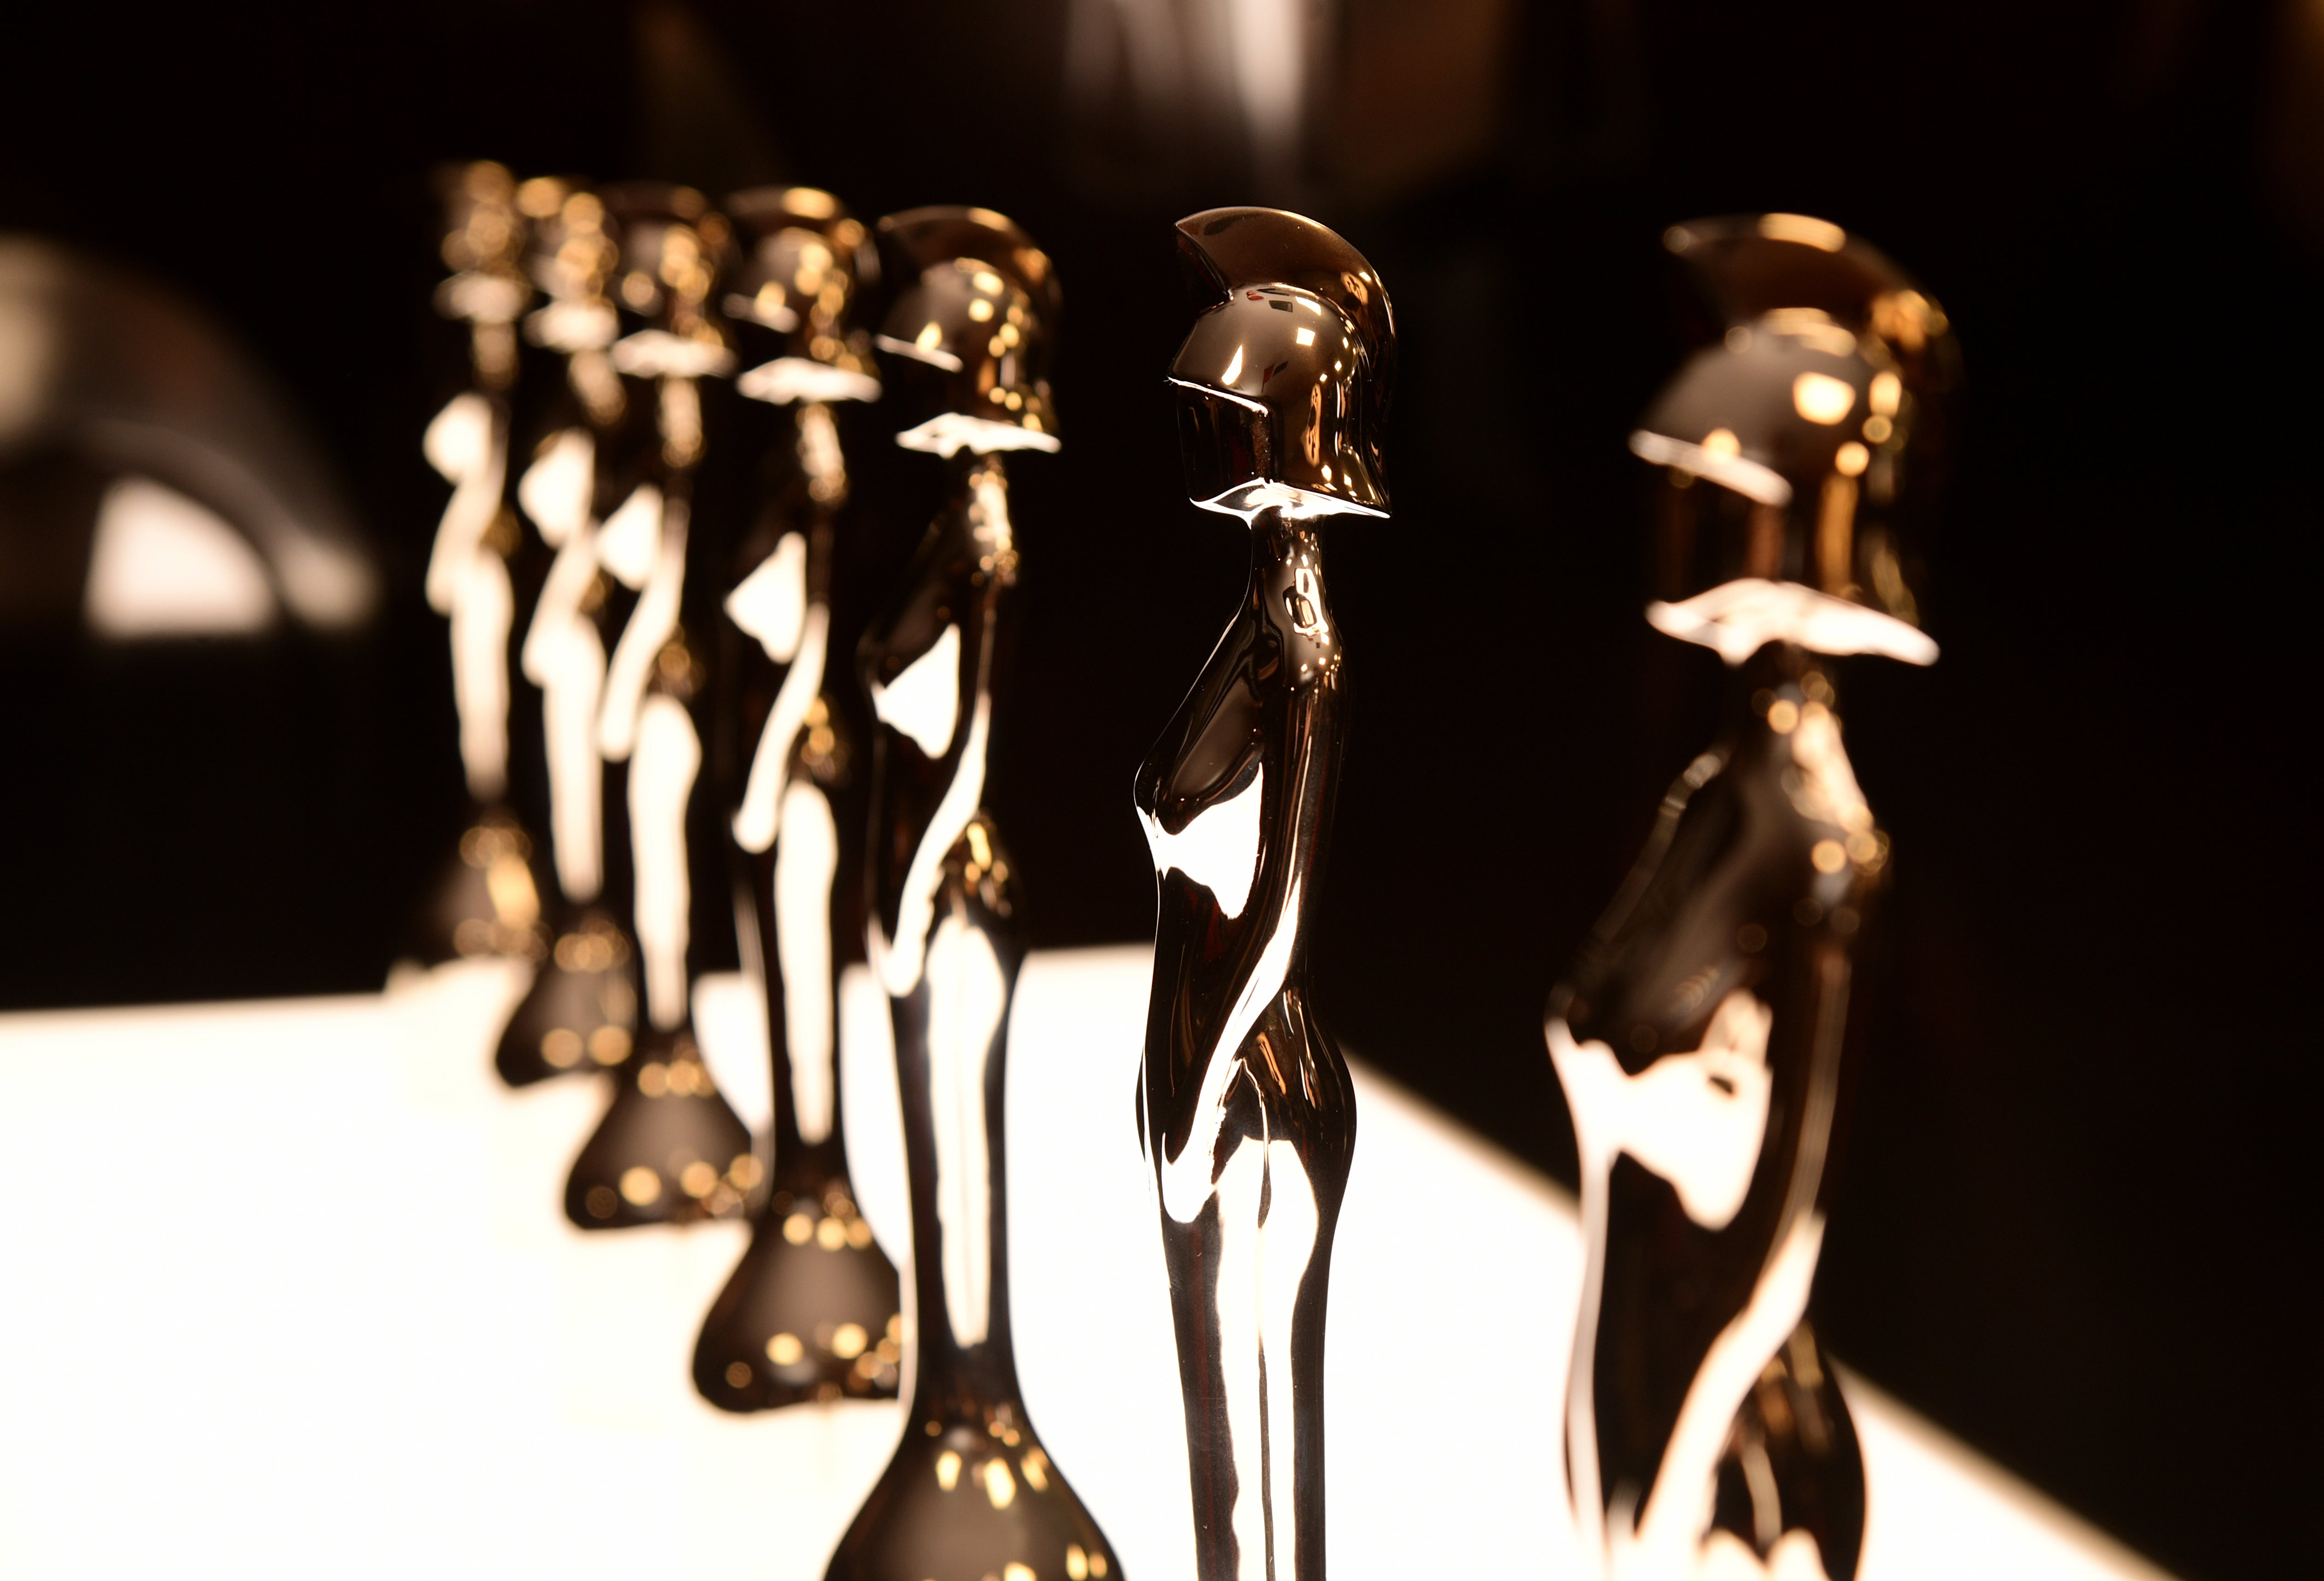 The Brit Awards 2022 will be held at the O2 Arena, London.